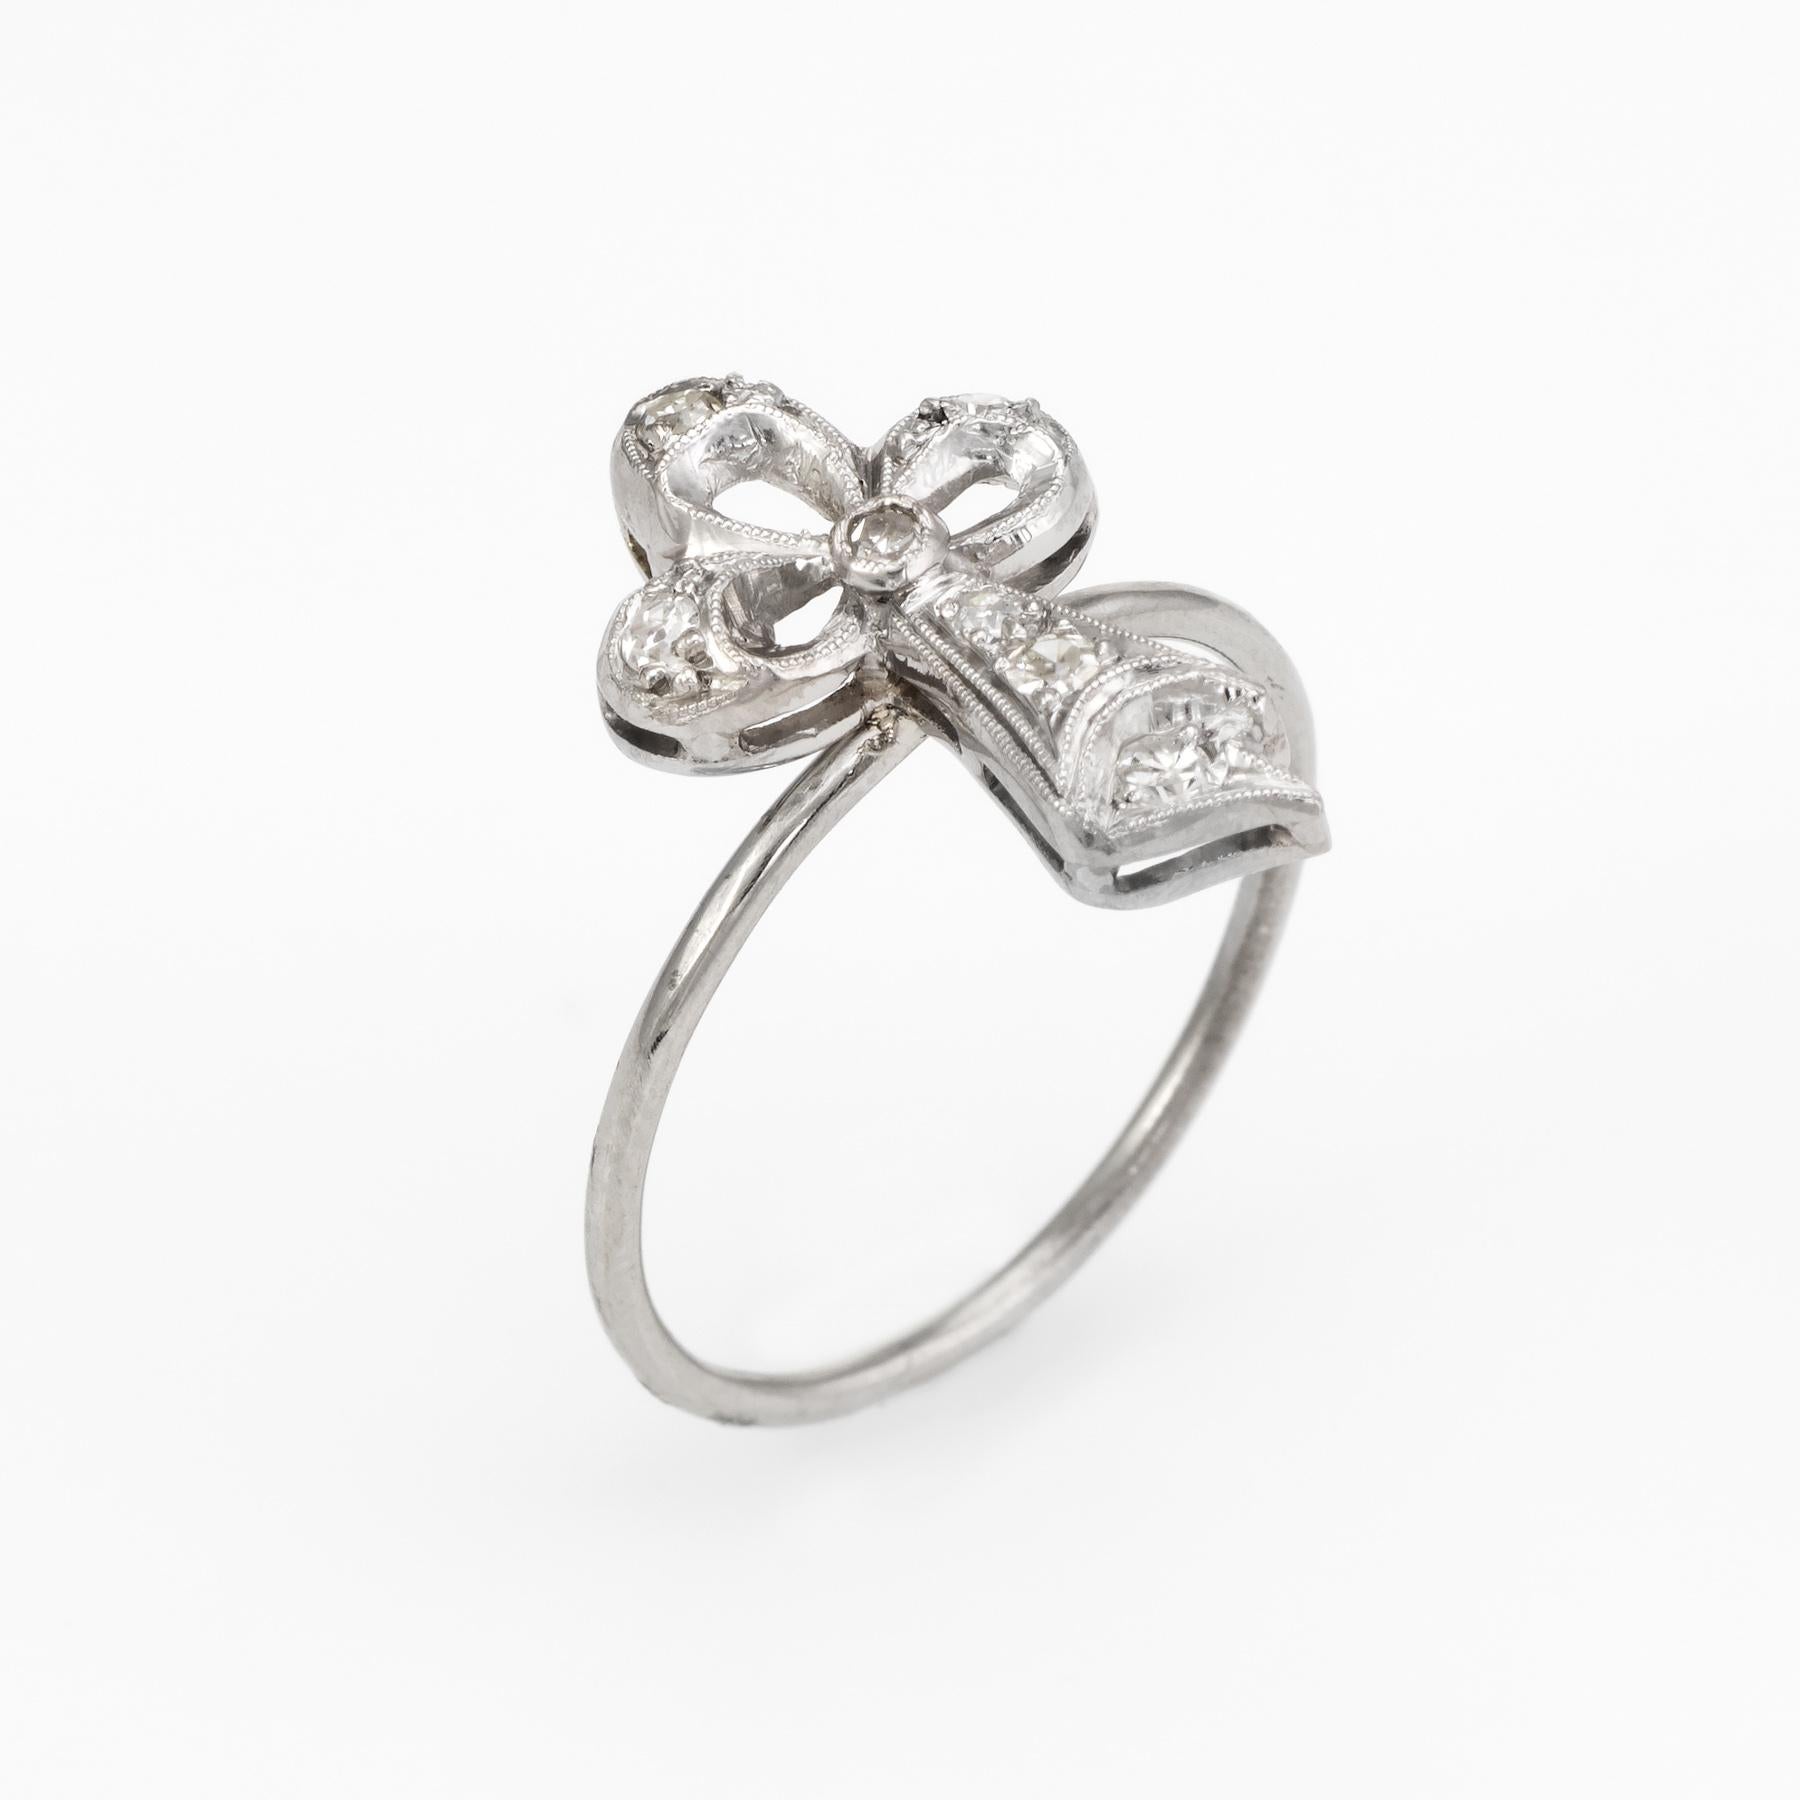 Originally a vintage Art Deco era stick pin (circa 1920s to 1930s), the stylized clover is crafted in 14 karat white gold and platinum. 

The clover is mounted with the original stick pin. Our jeweler rounded the stick pin into a slim band for the